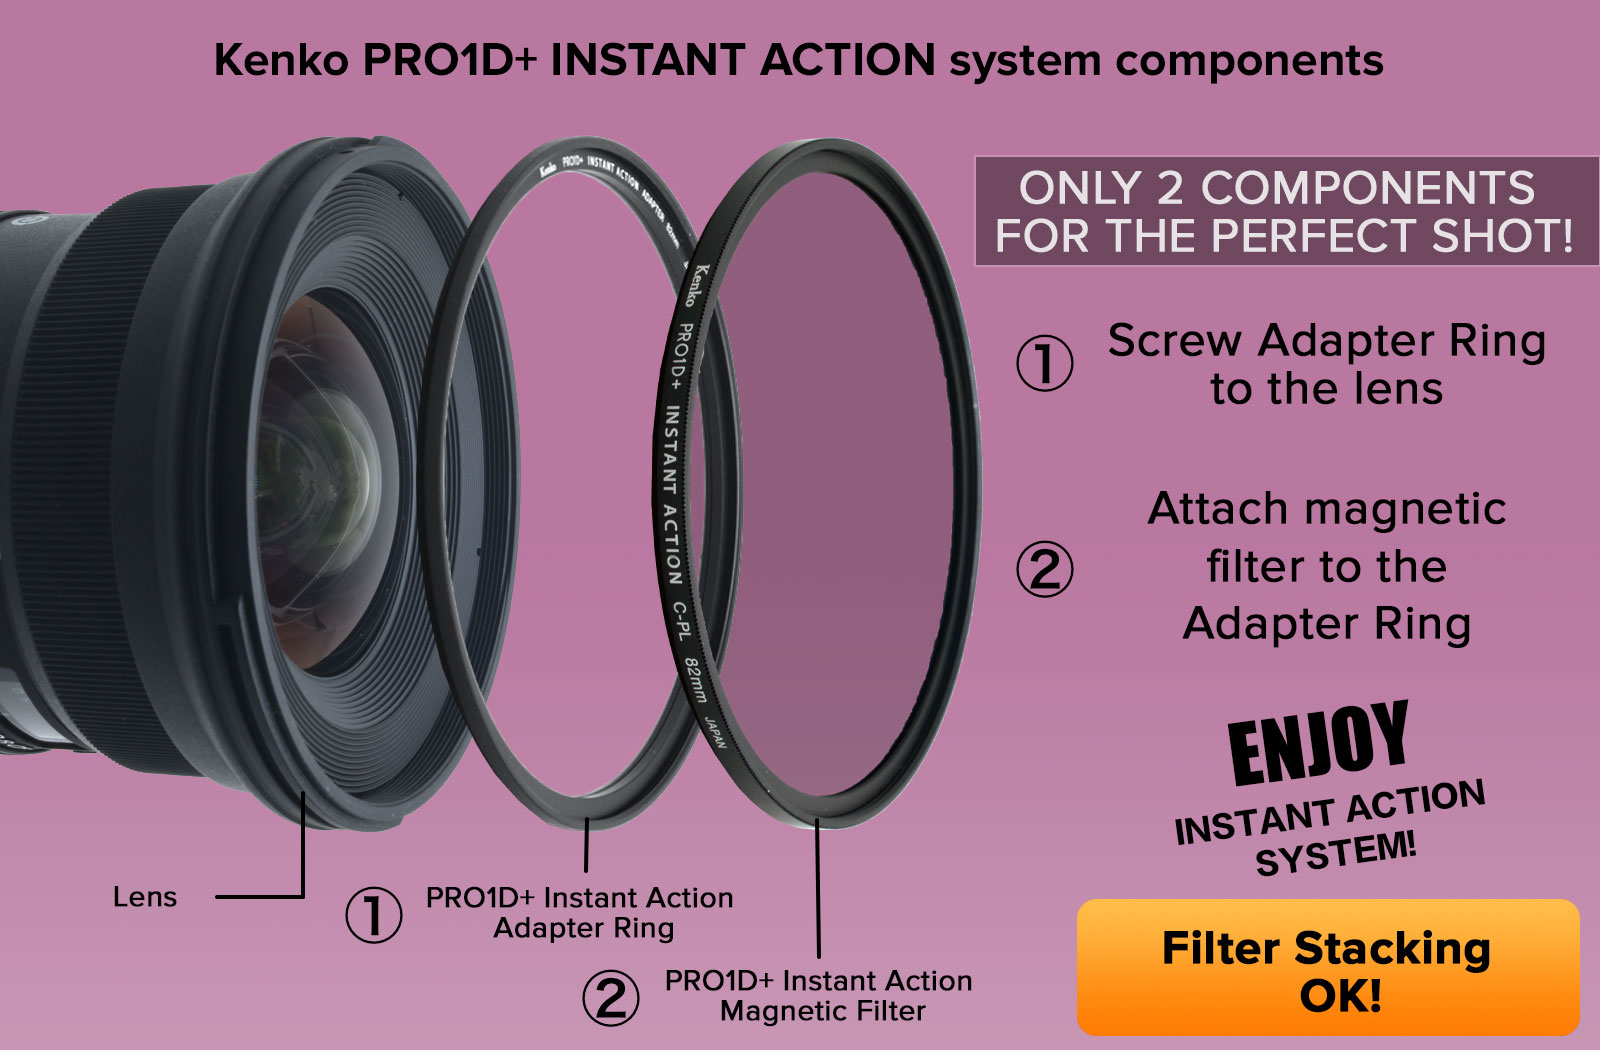 Adapter Ring is necessary to use a Kenko PRO1D+ INSTANT ACTION System. If you want to change Kenko PRO1D+ Instant Action filters that are all the same size, you don't have to remove the Adapter Ring.